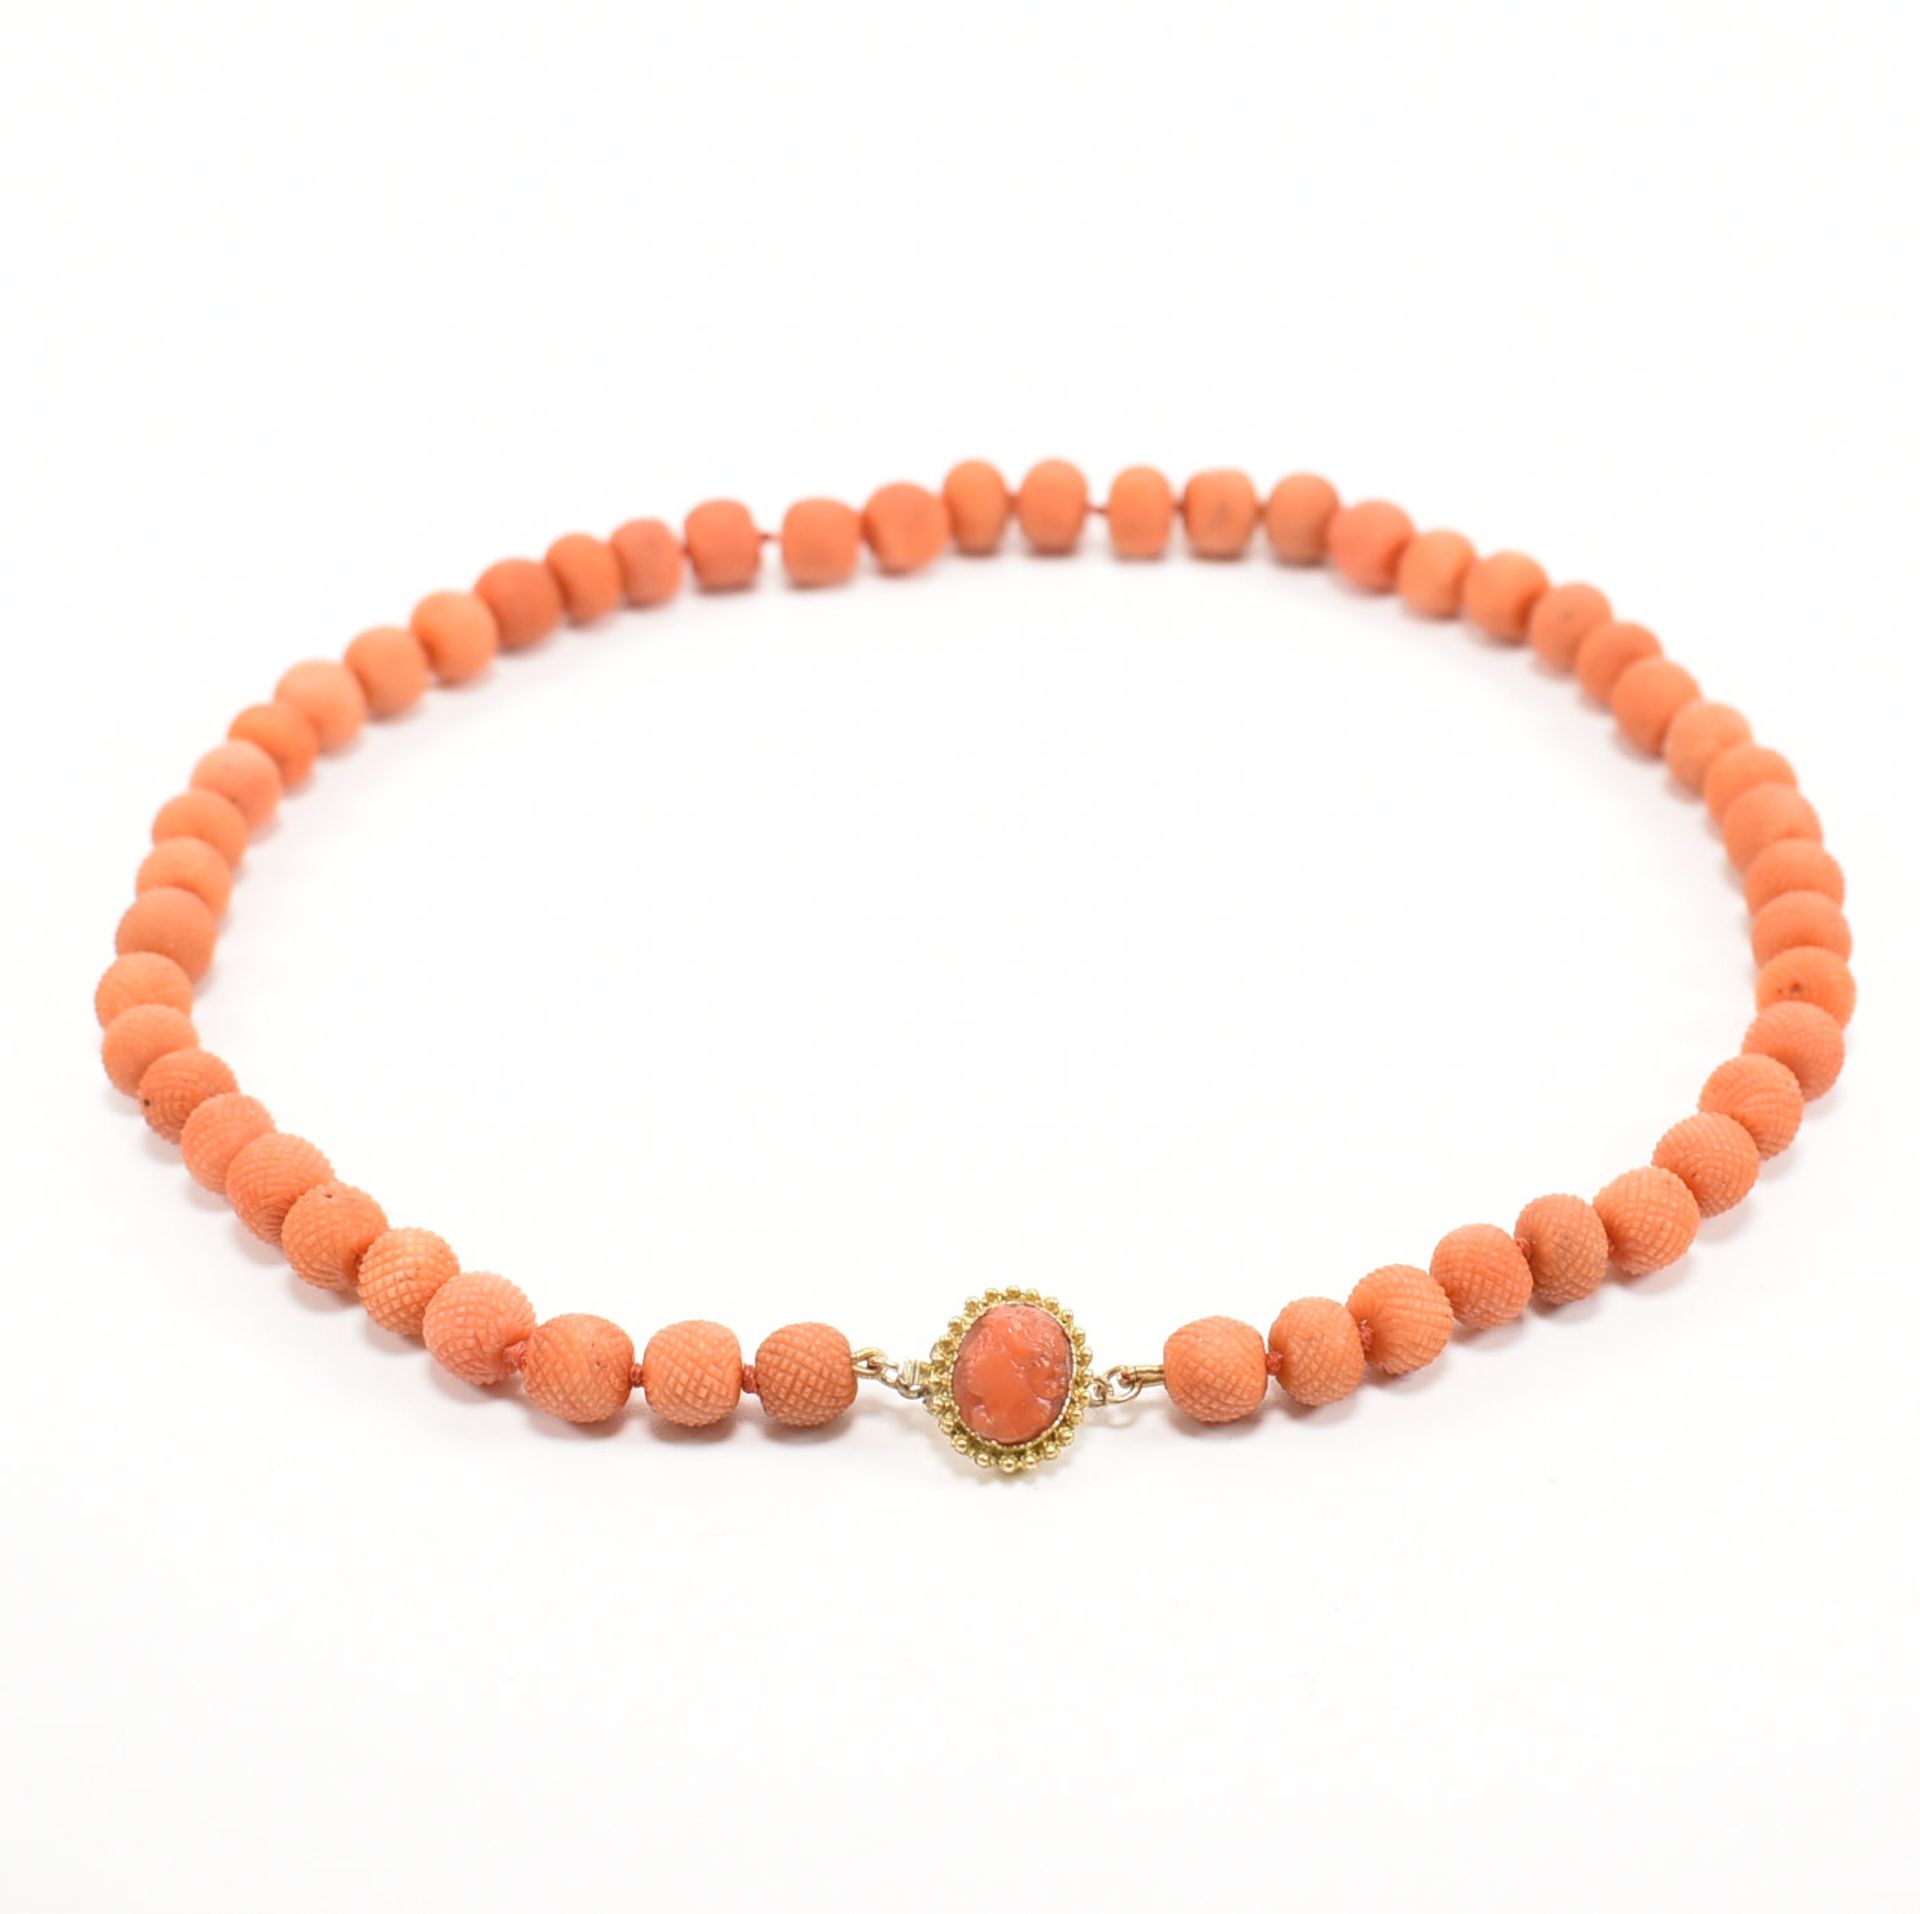 GEORGIAN CORAL PINEAPPLE BEAD NECKLACE - Image 2 of 8